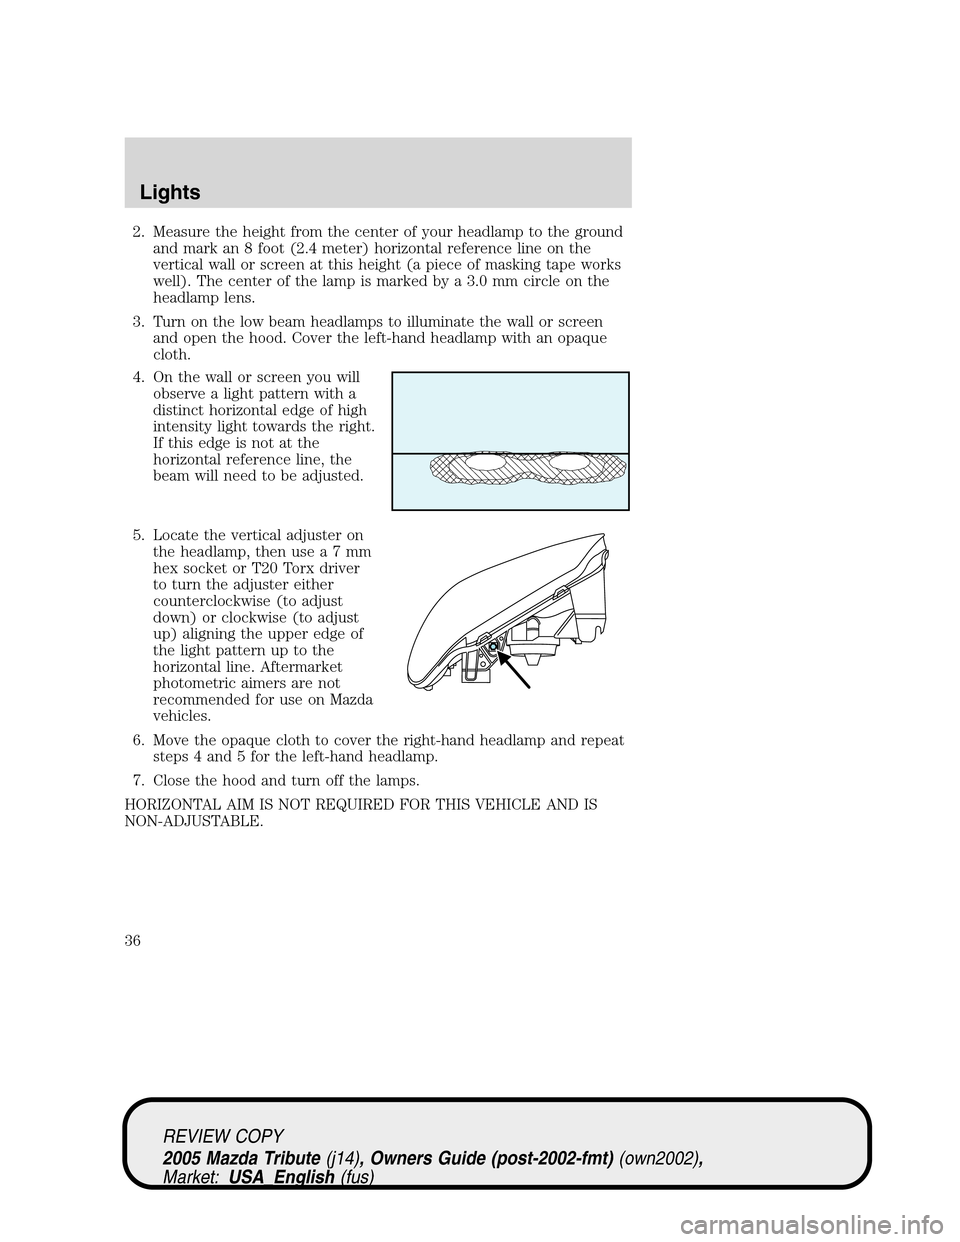 MAZDA MODEL TRIBUTE 2005  Owners Manual (in English) 2. Measure the height from the center of your headlamp to the ground
and mark an 8 foot (2.4 meter) horizontal reference line on the
vertical wall or screen at this height (a piece of masking tape wor